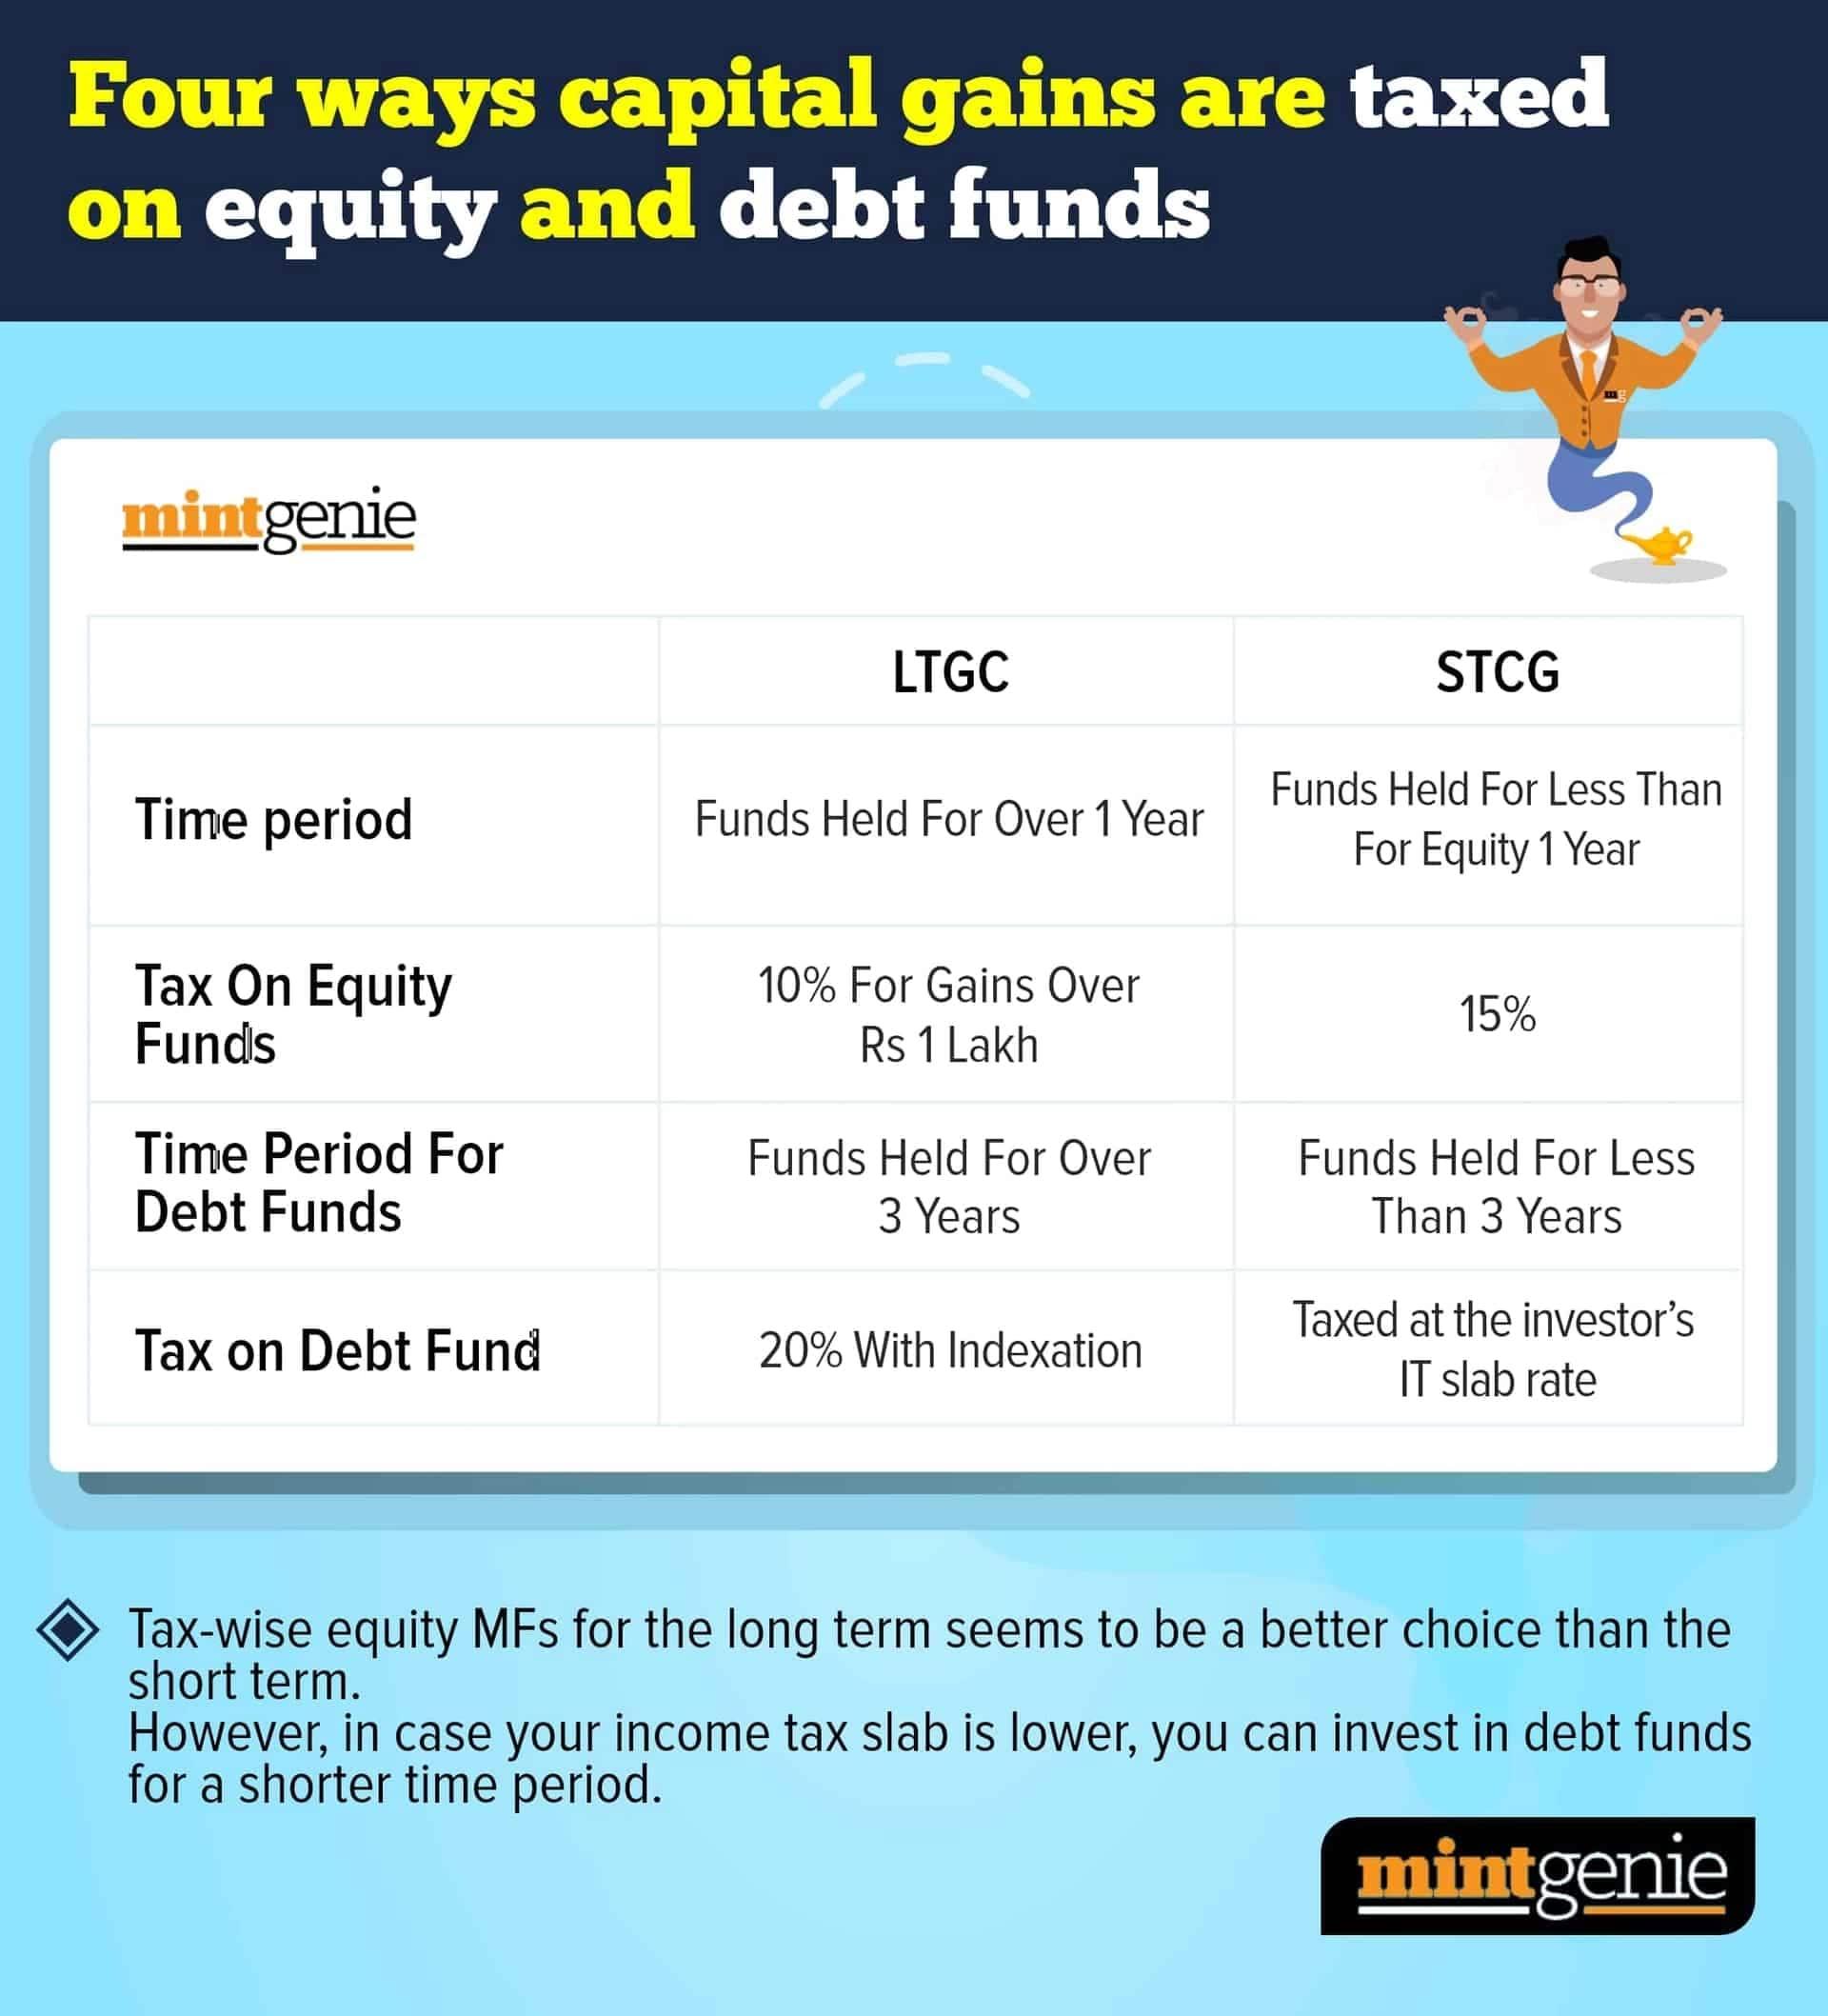 Different ways in which capital gains are taxed in case of equity and debt funds. 